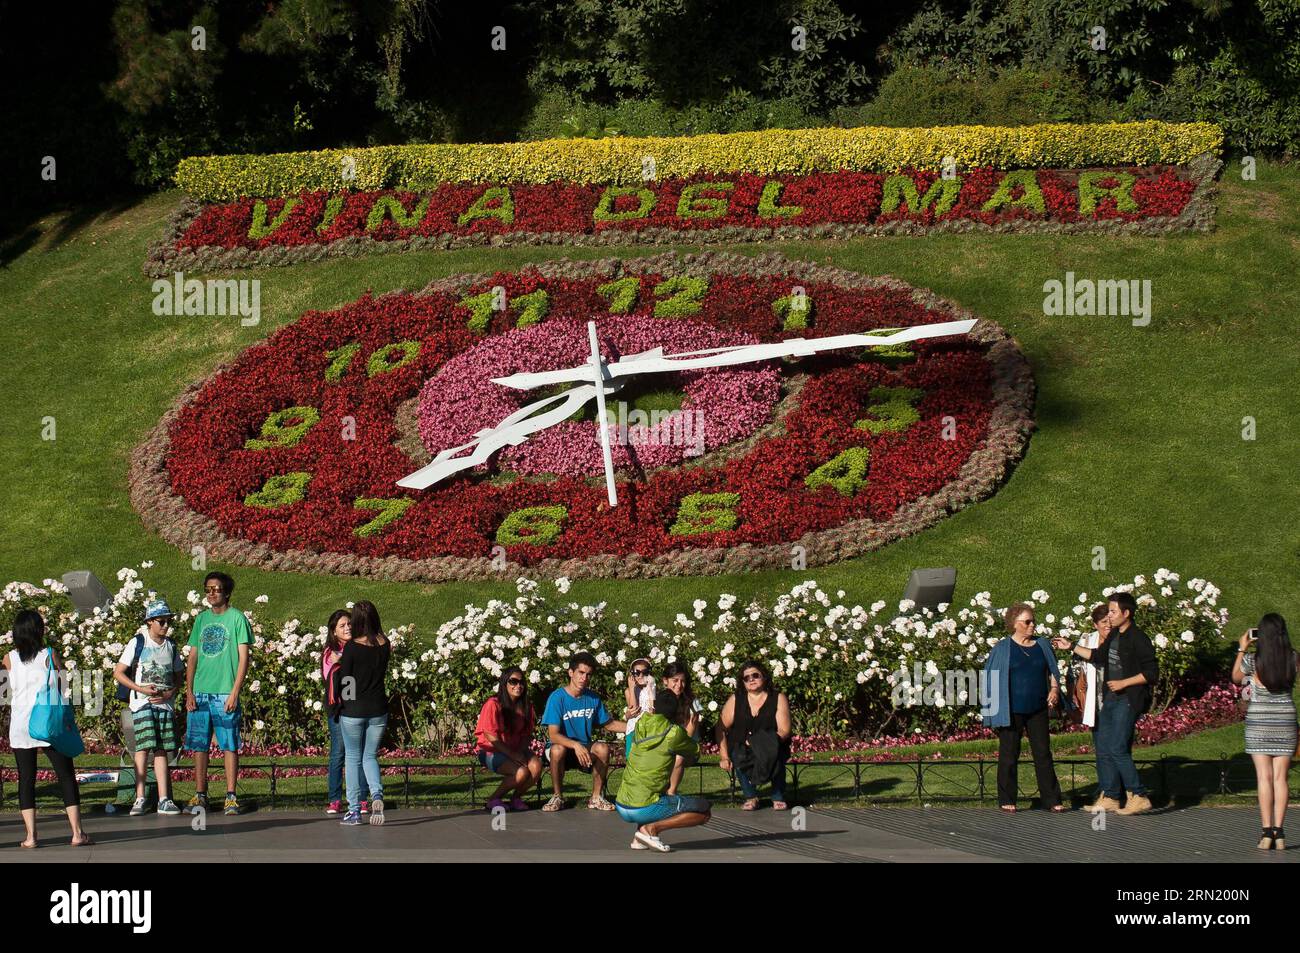 Image taken on Jan. 26, 2015 shows the tourists taking pictures in front of the Flower Clock near the beach of Caleta Abarca, in the central zone of Vina del Mar, Chile. Vina del Mar, traditionally known as Garden City is a Chilean city that belongs to the province and region of Valparaiso, and it is featured by its resorts, malls, hotels and different entertainment places, which consolidates it as one of the touristic capitals of the country.) (rtg) CHILE-VINA DEL MAR-TOURISM JORGExVILLEGAS PUBLICATIONxNOTxINxCHN   Image Taken ON Jan 26 2015 Shows The tourists Taking Pictures in Front of The Stock Photo